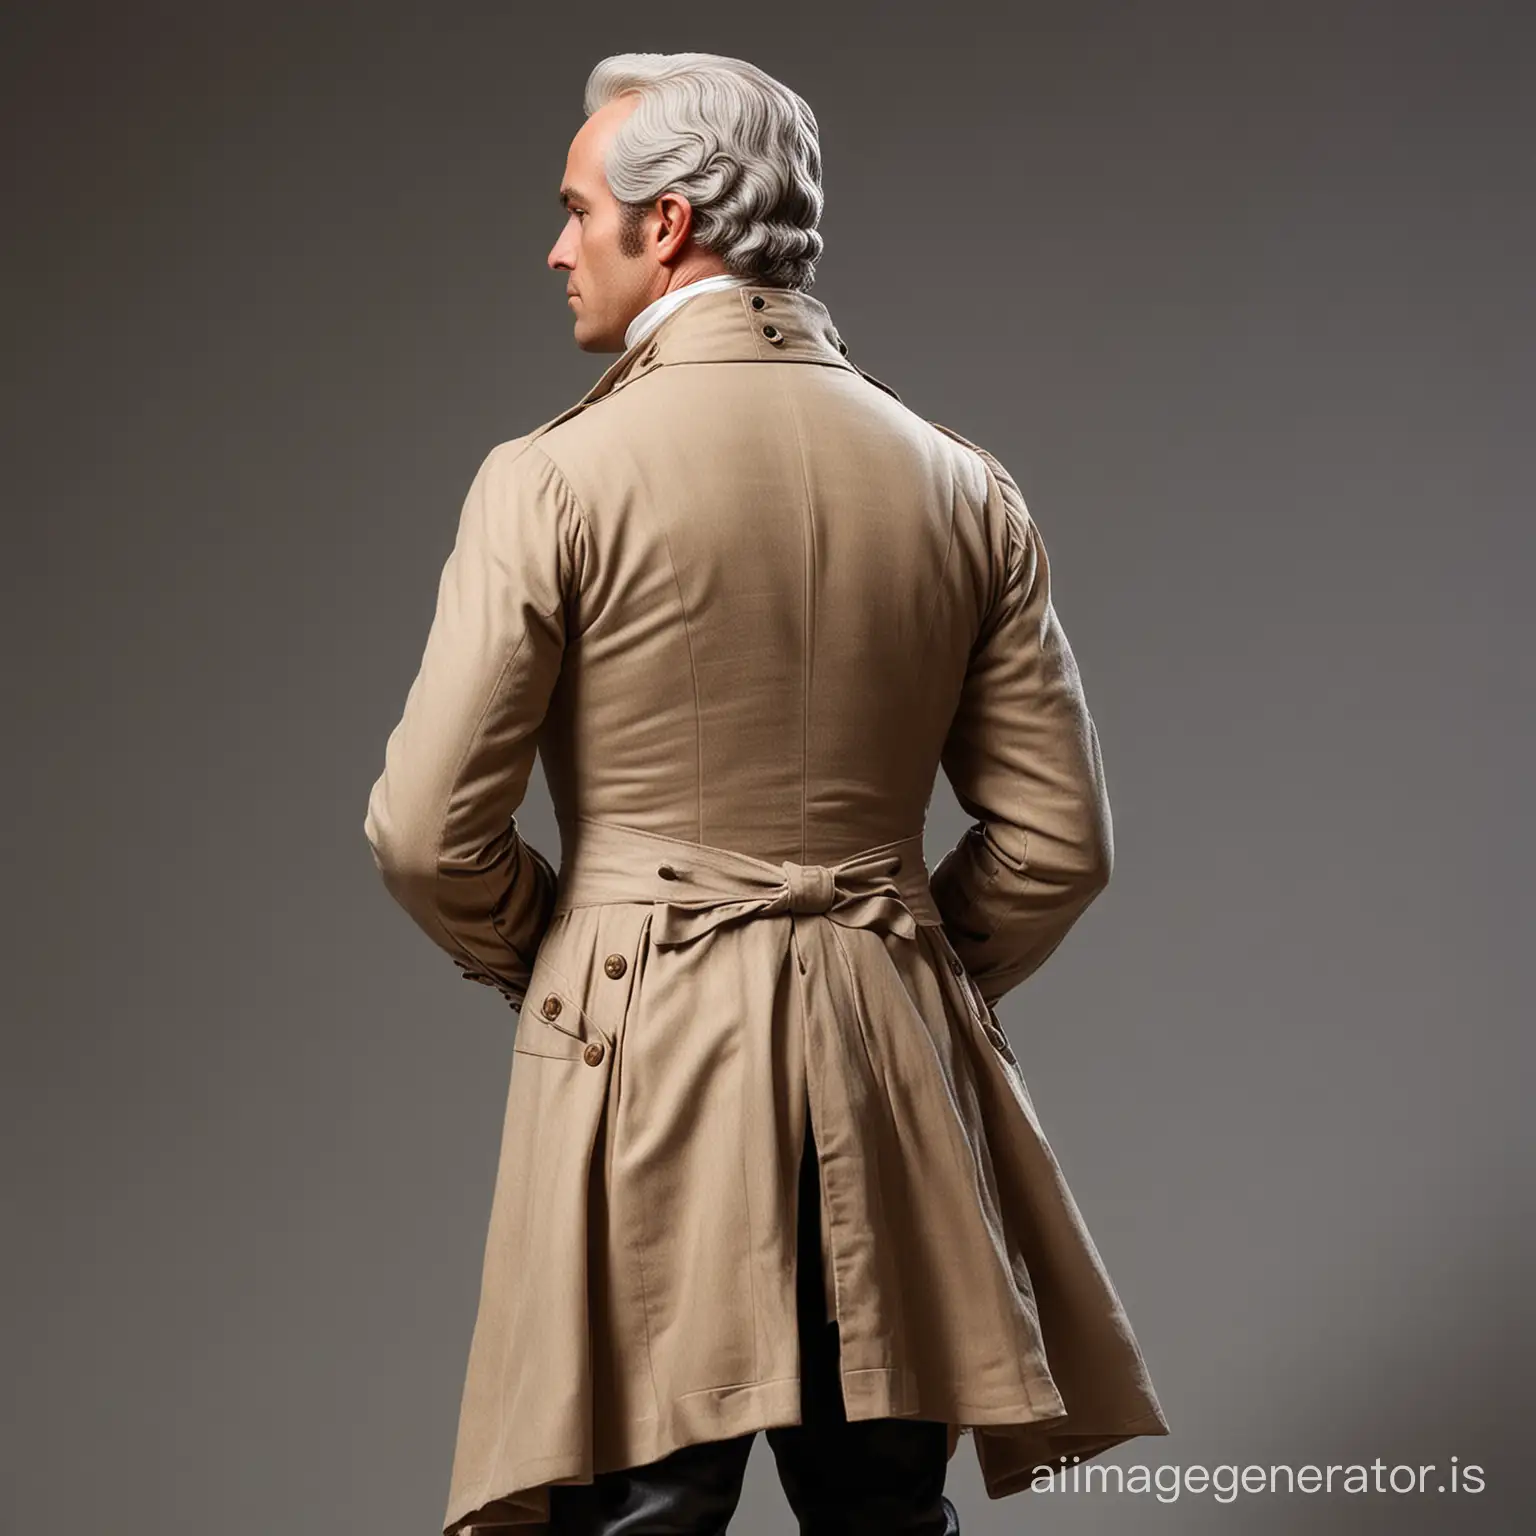 a full body picture of alexander hamilton from behind